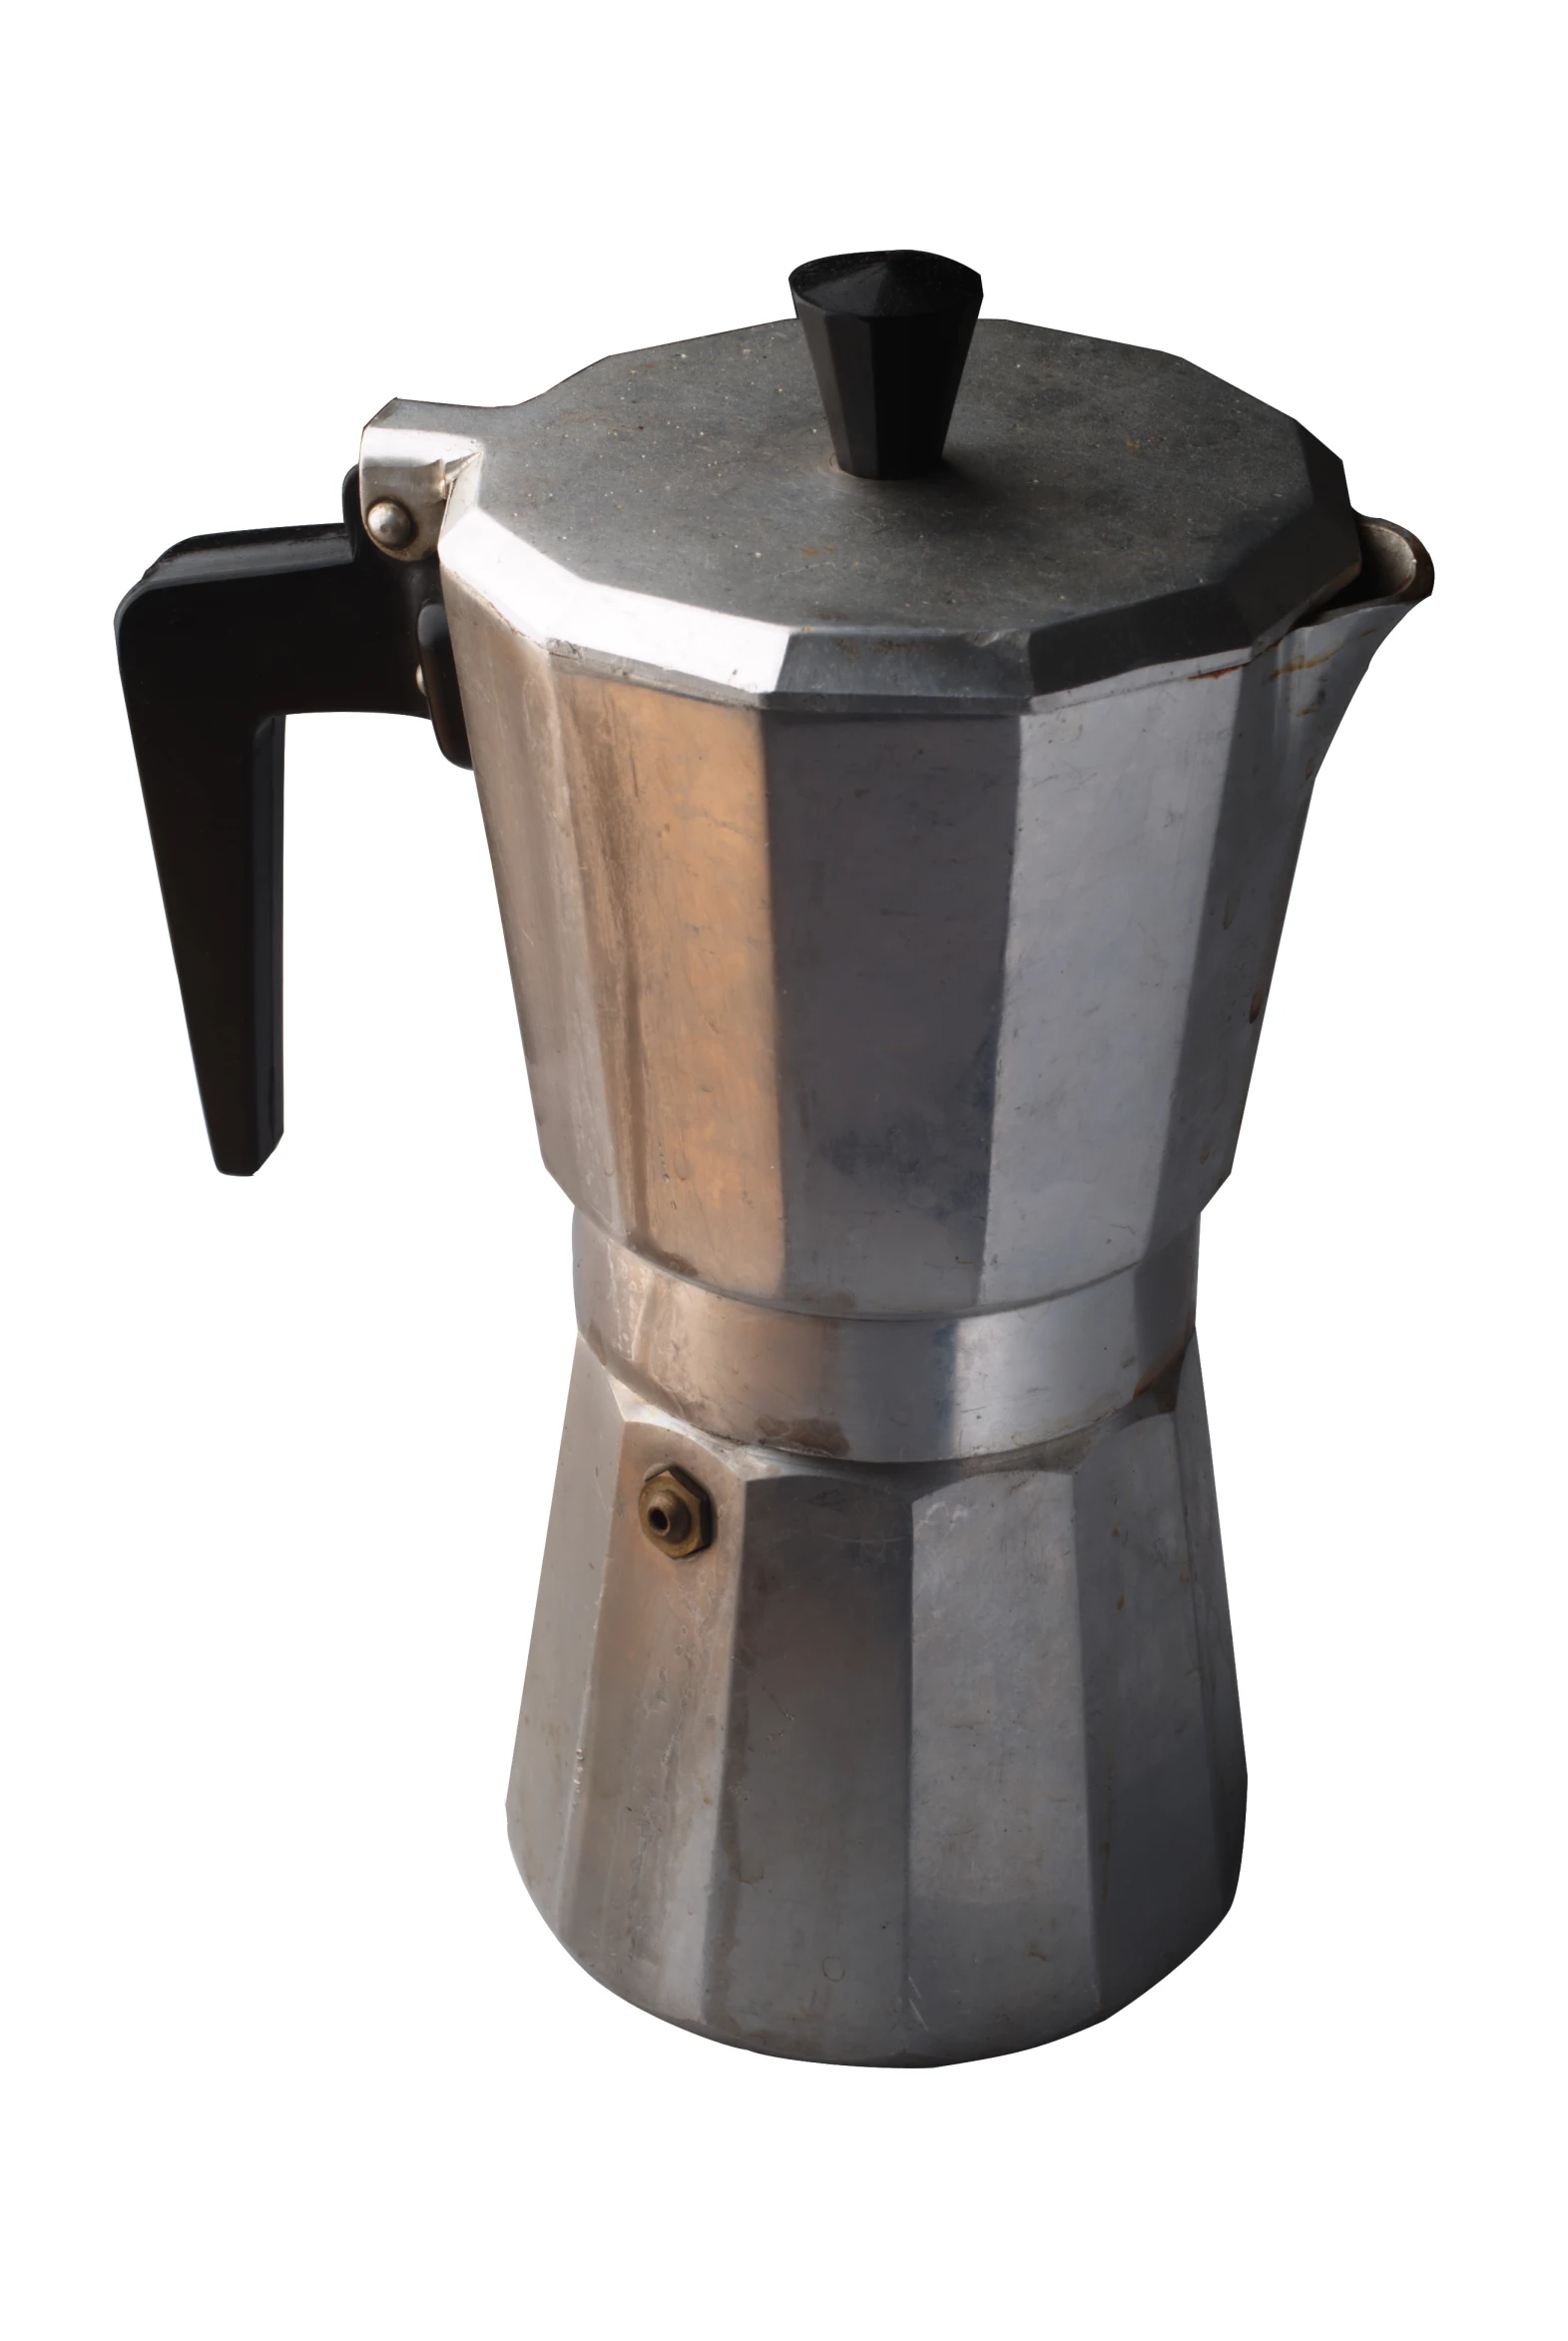 a coffee pot with an interesting handle